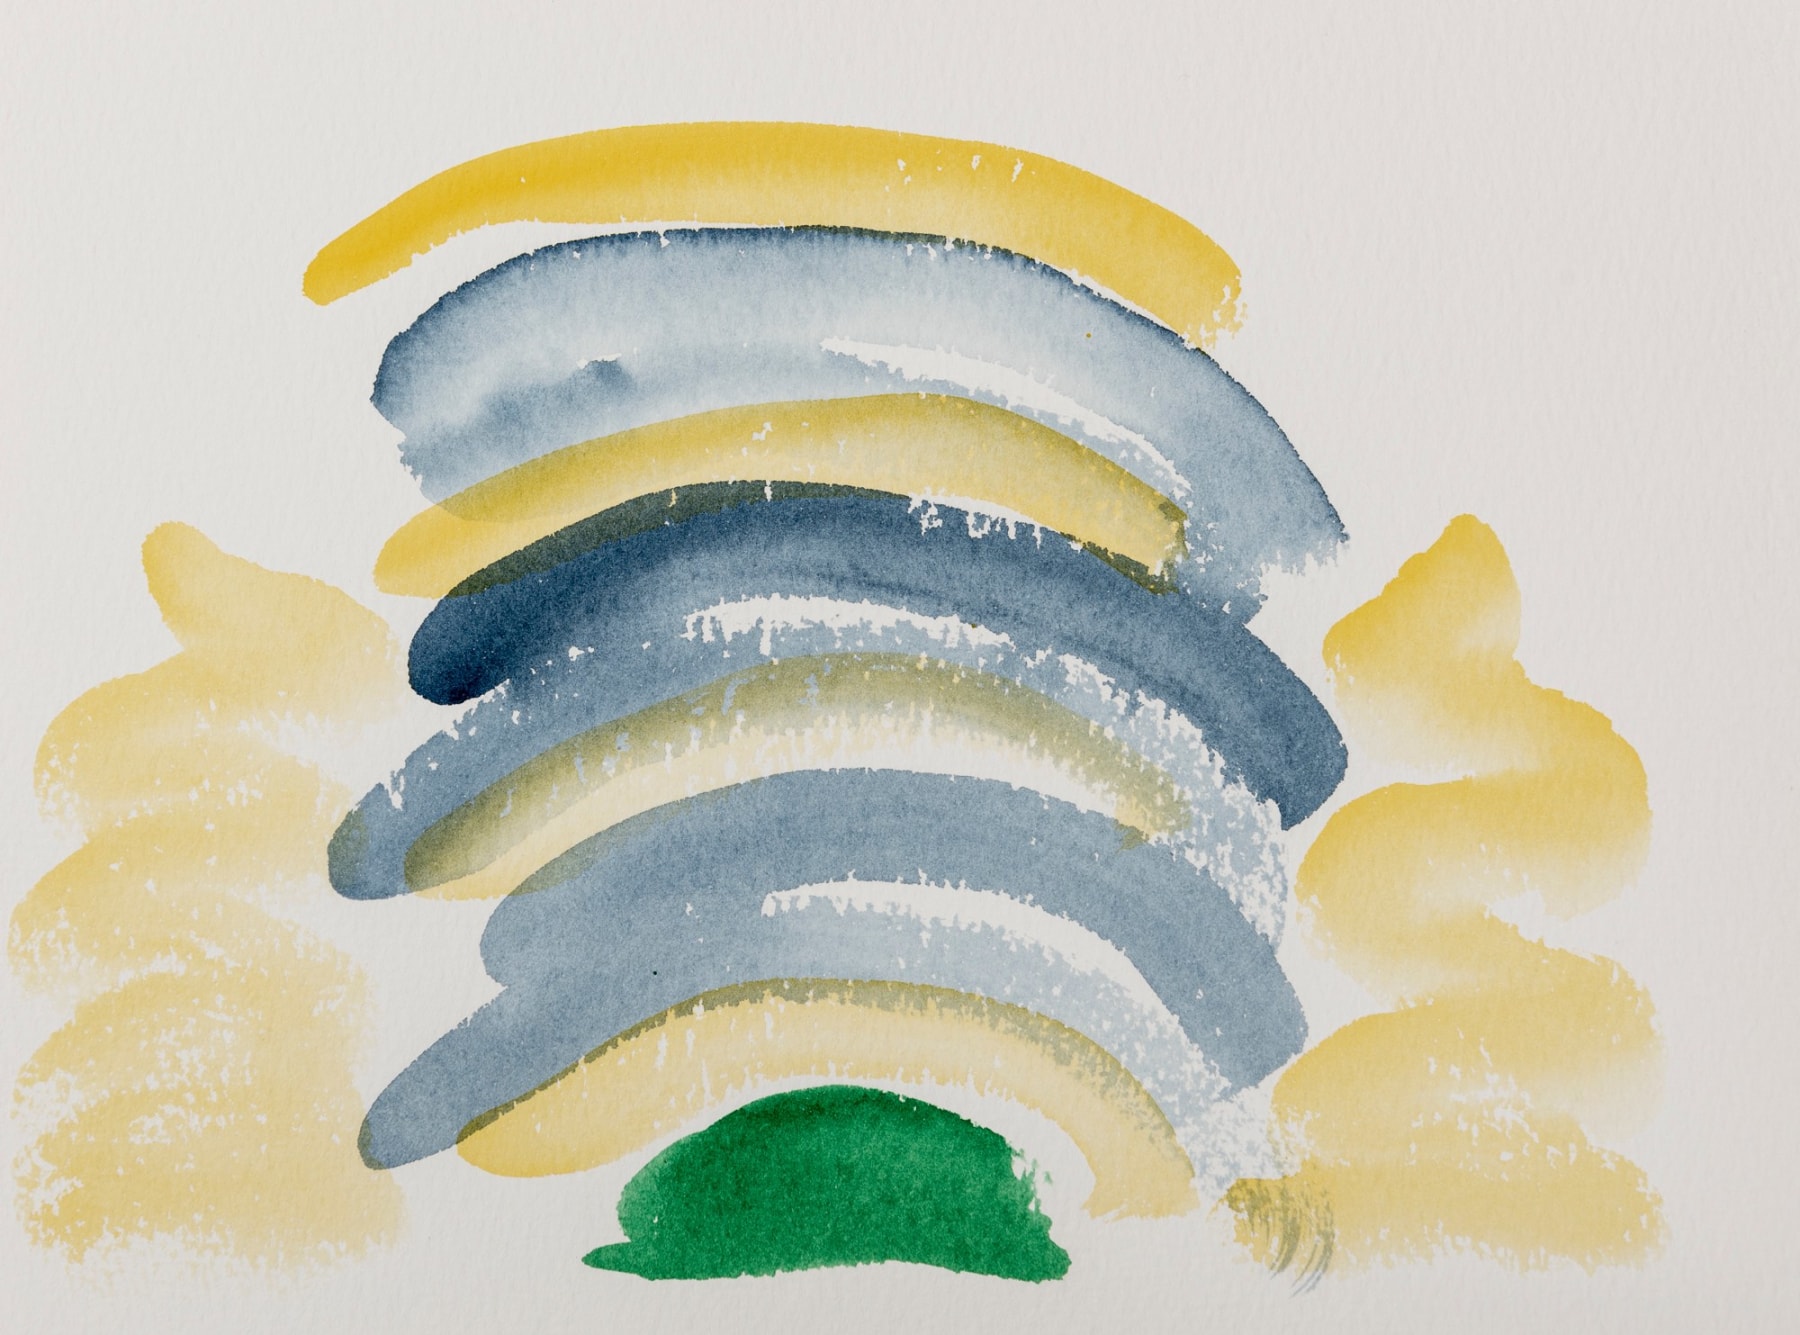 Untitled, 1980s   Watercolor on paper   9 x 12 inches